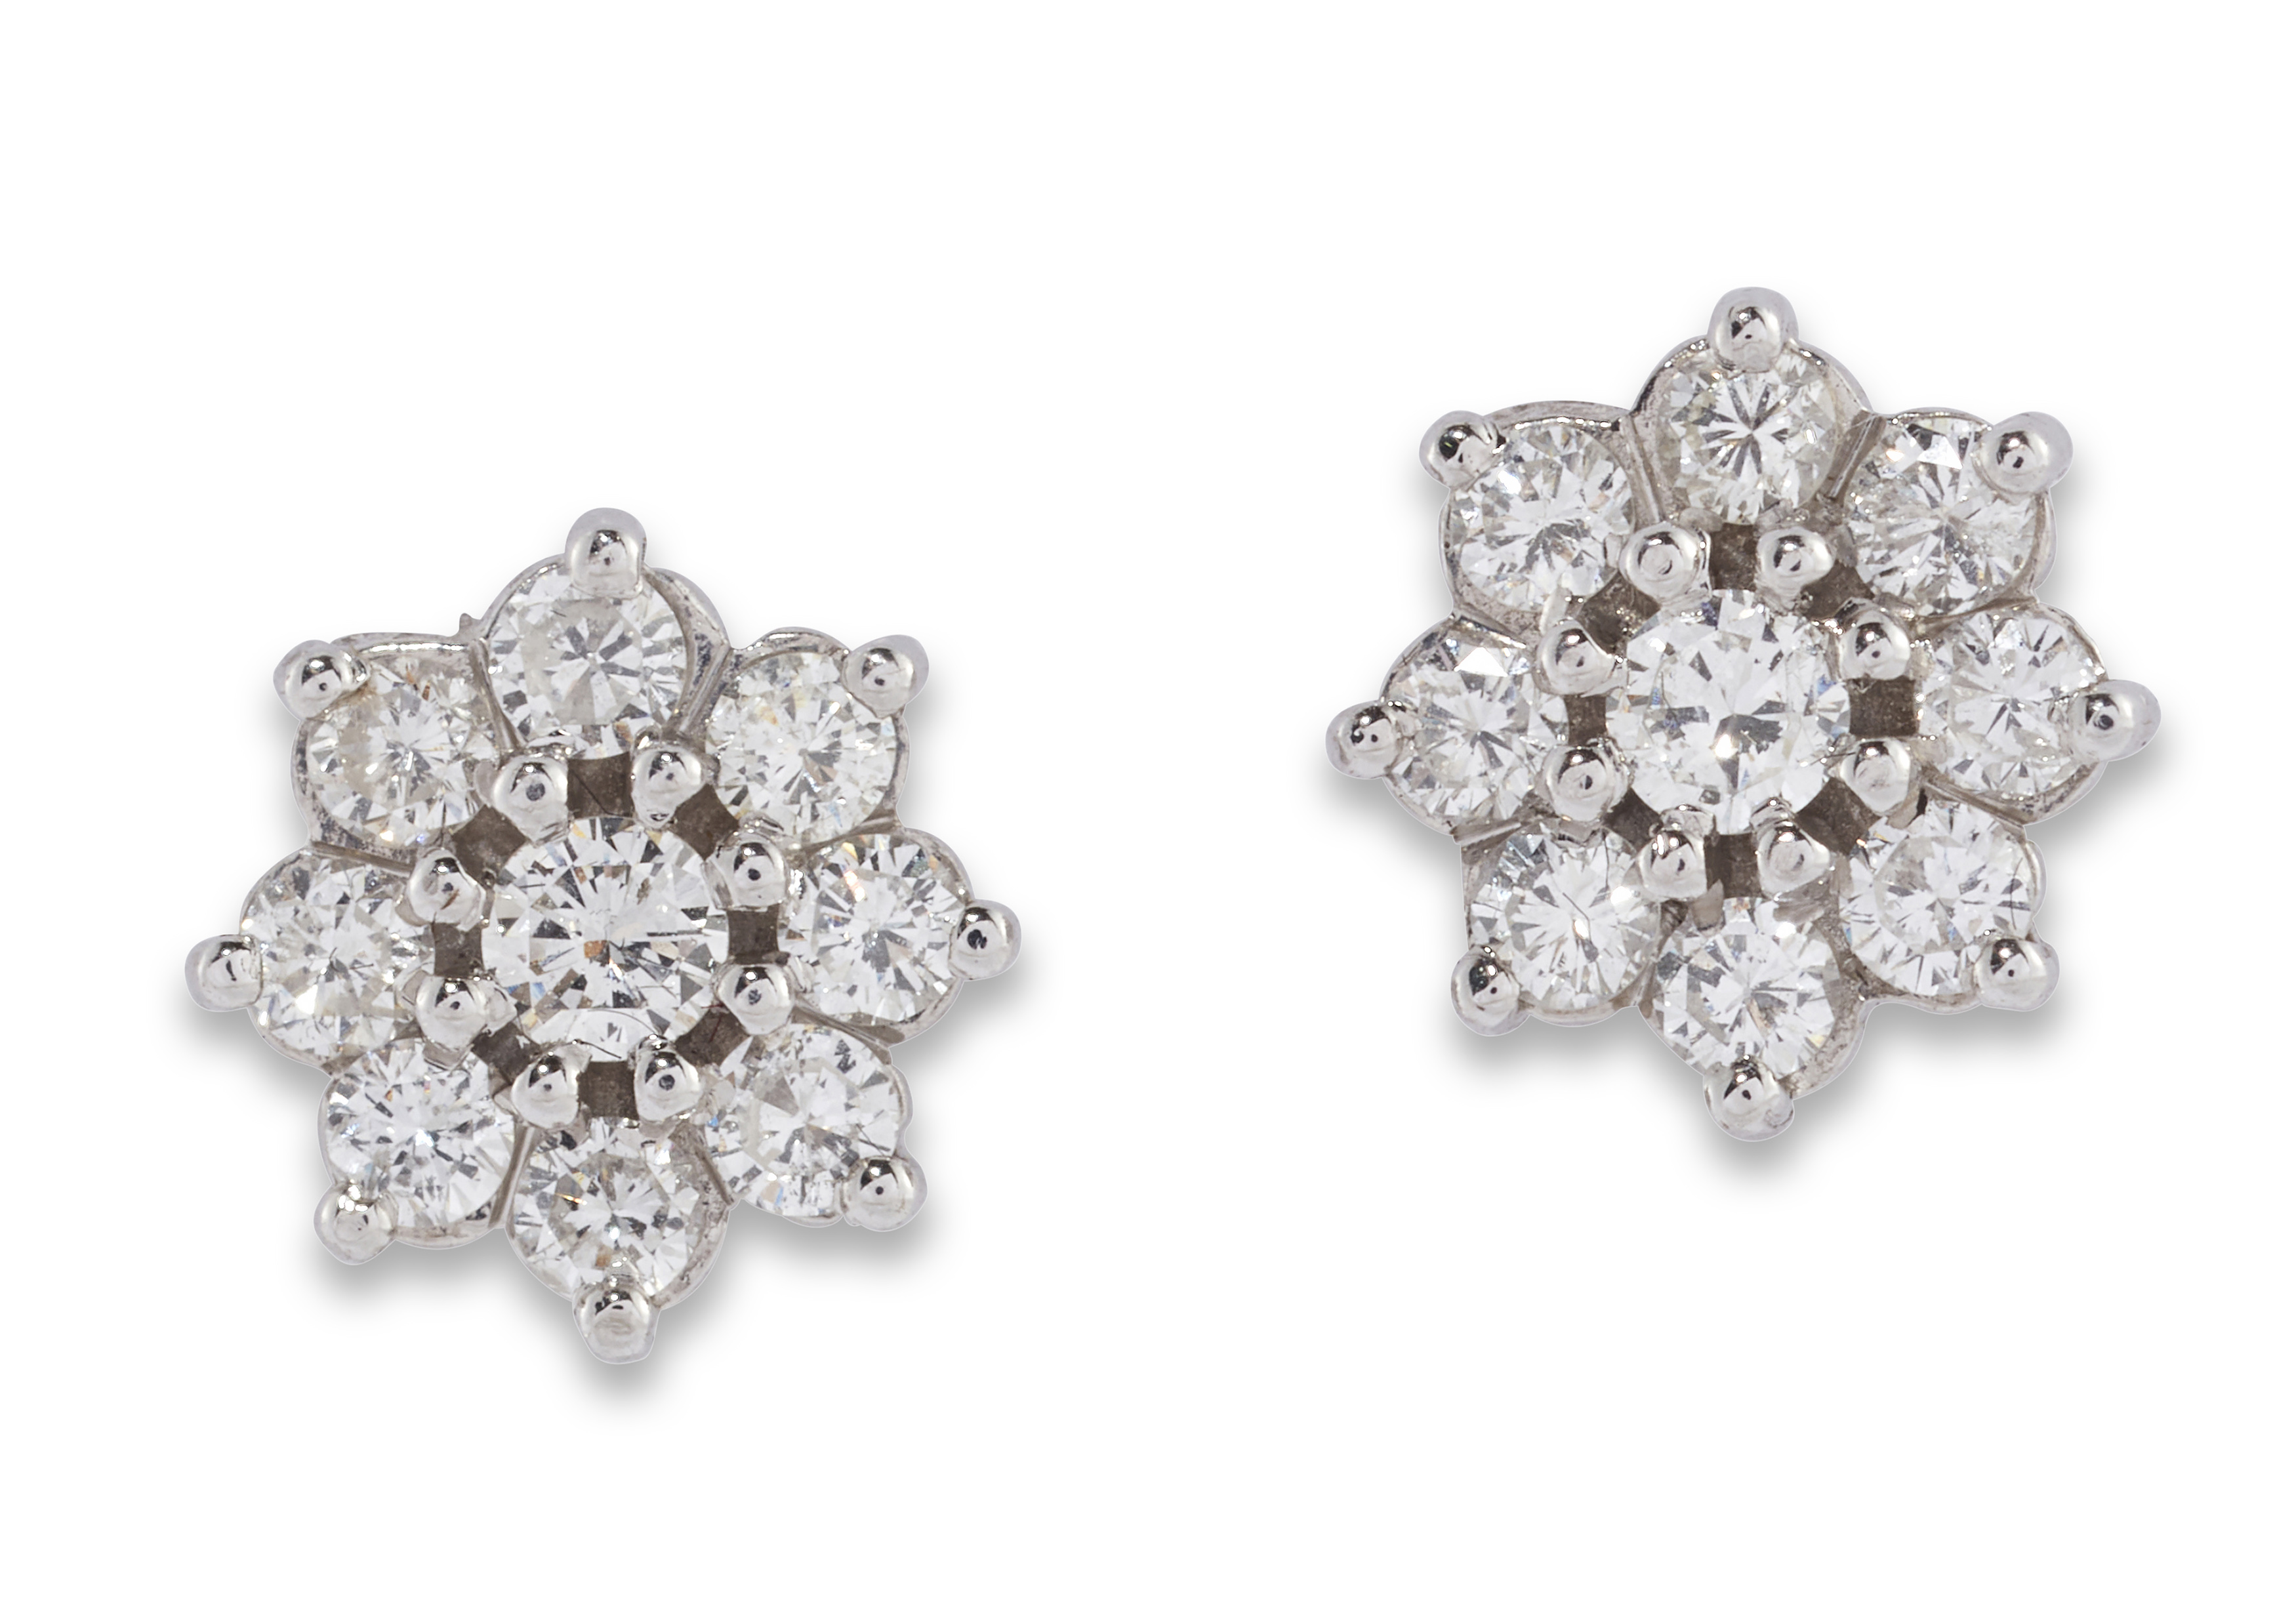 A pair of 18ct white gold diamond cluster earrings, with a cluster of brilliant-cut diamonds, cla...